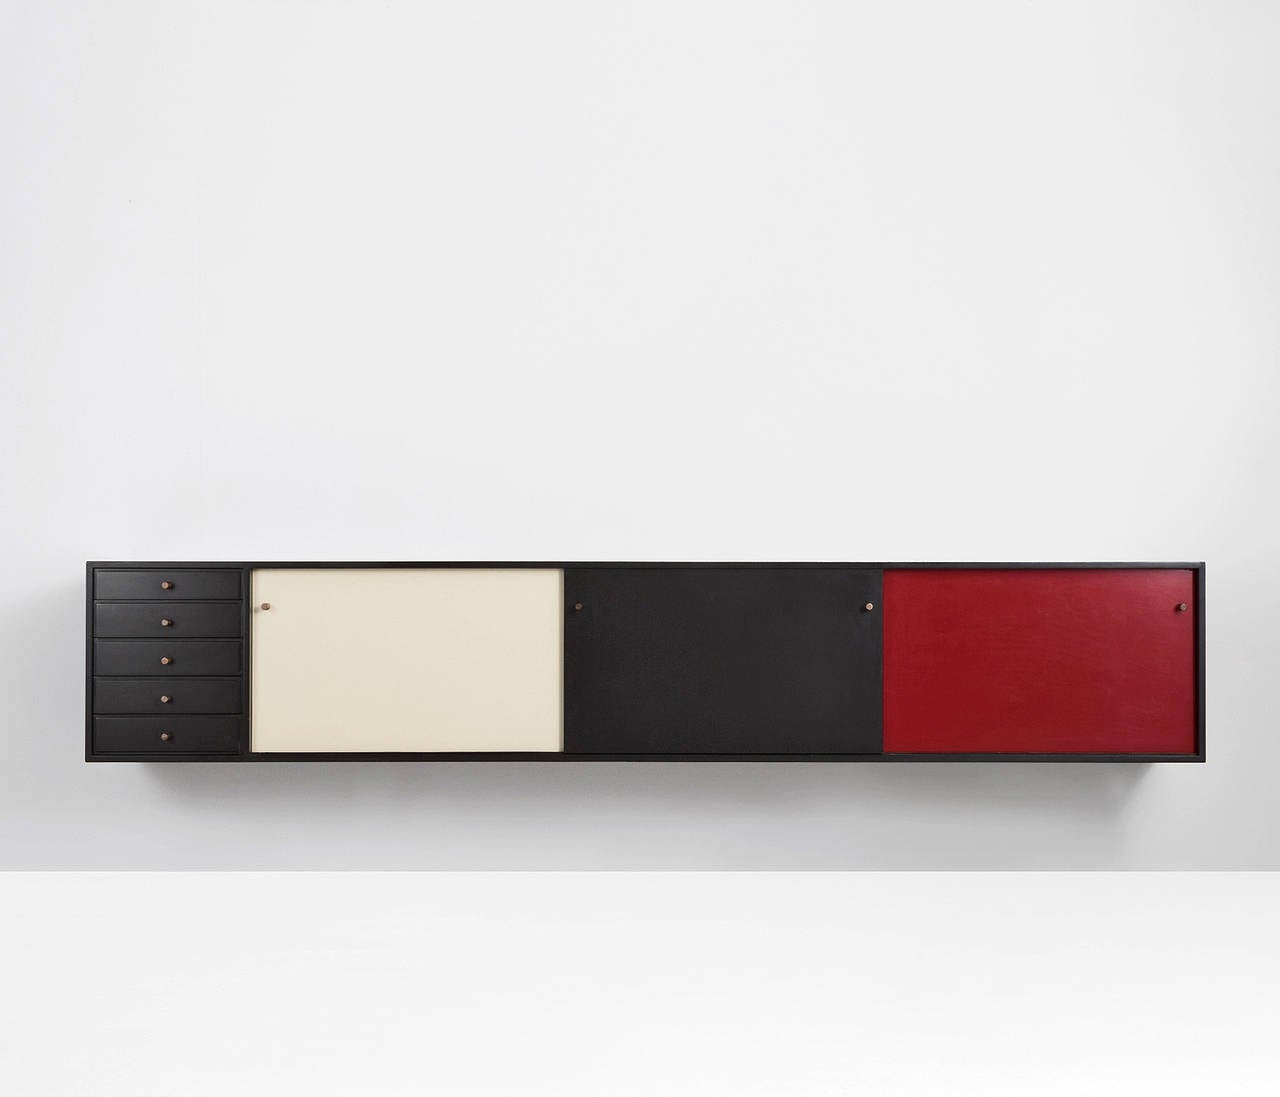 Extreme large wall-mounted sideboard by Jos De Mey, Belgium, 1970s.

Very well-made long sideboard from lacquered wood and very defined wooden details. The minimalistic grips are a great addition with the contrast colors of the separate doors,